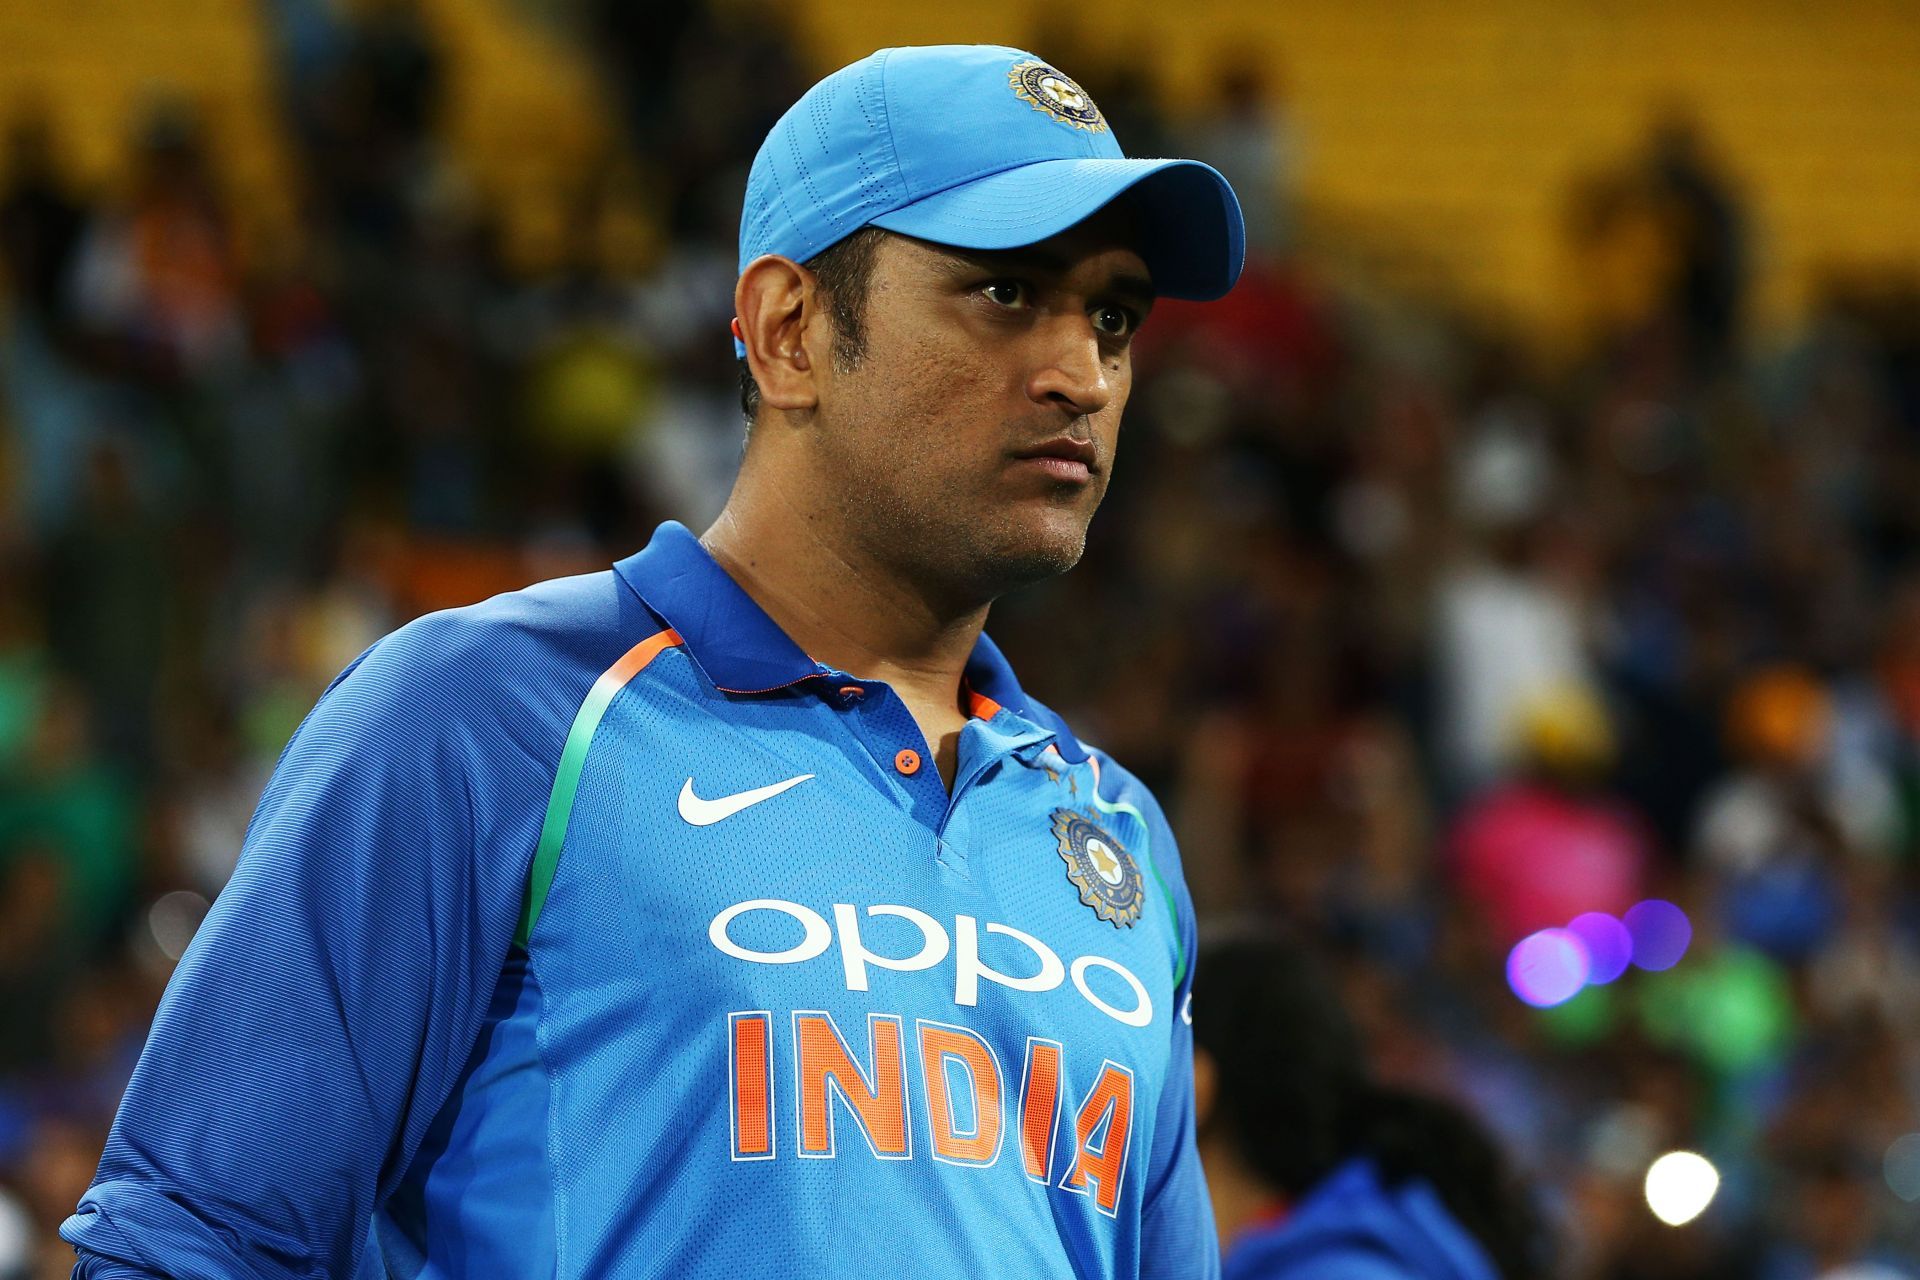 MS Dhoni announced his retirement on August 15, 2020